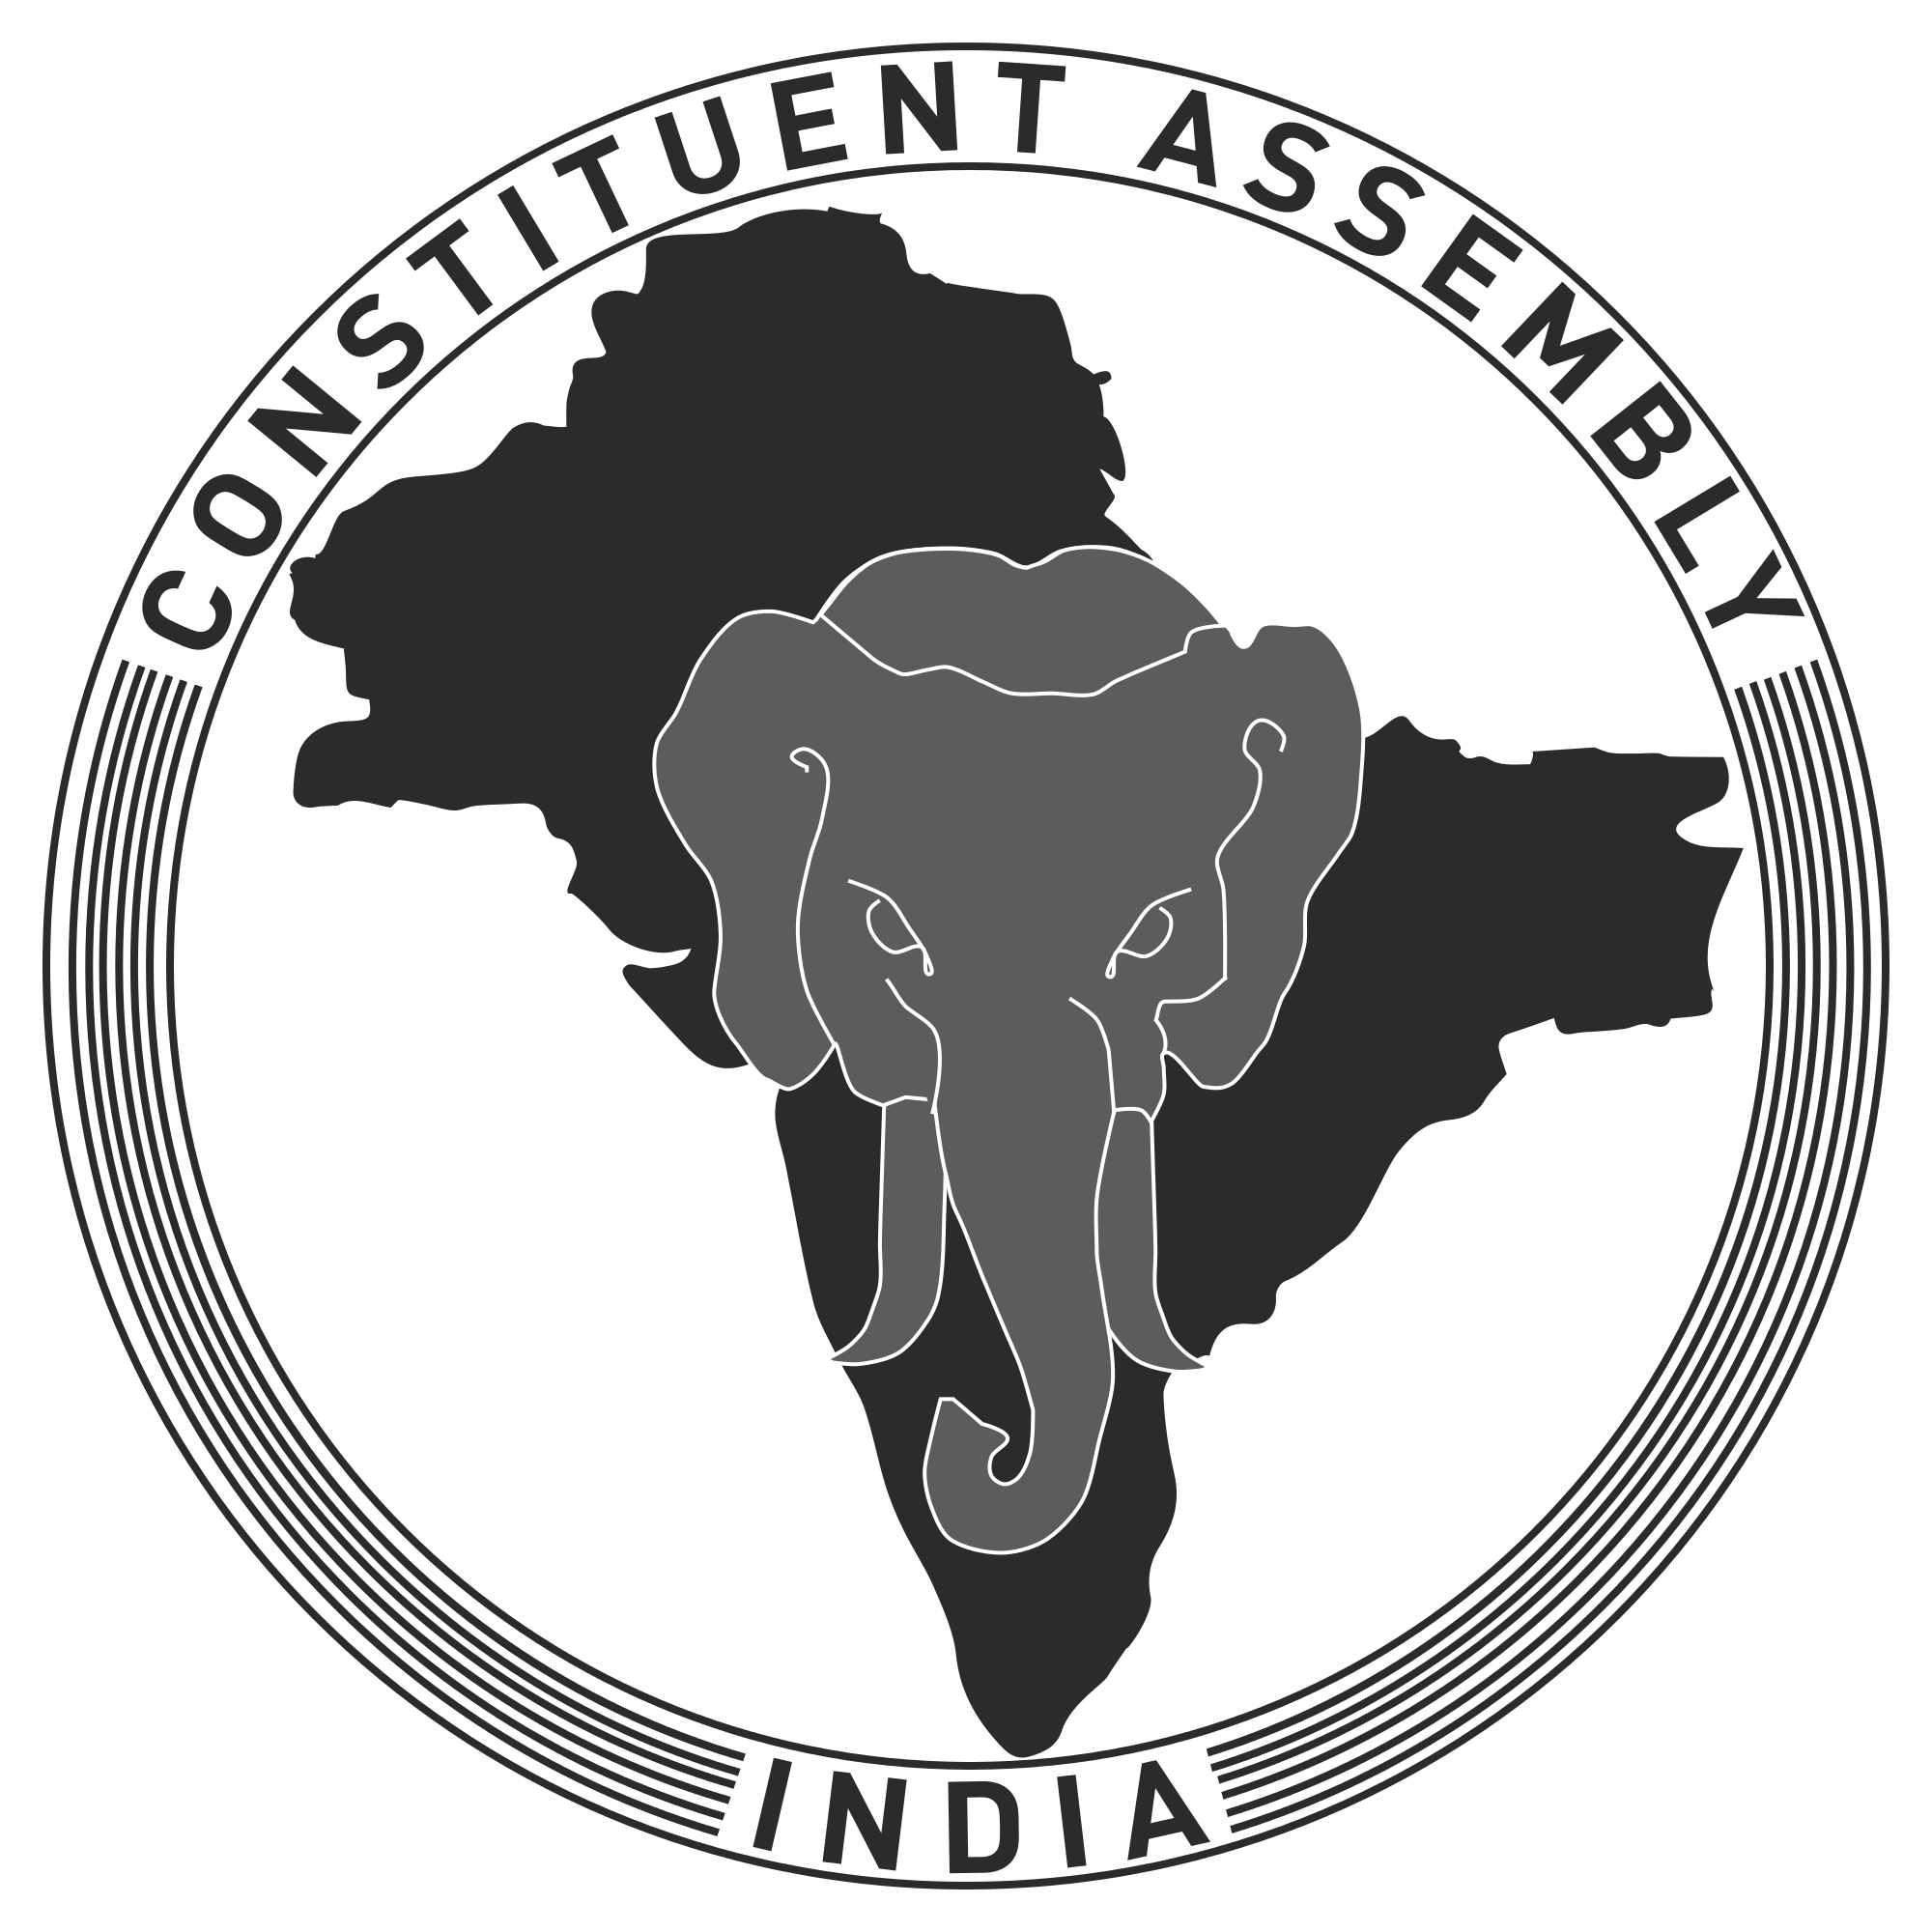 2000px-Seal_of_the_Constituent_Assembly_